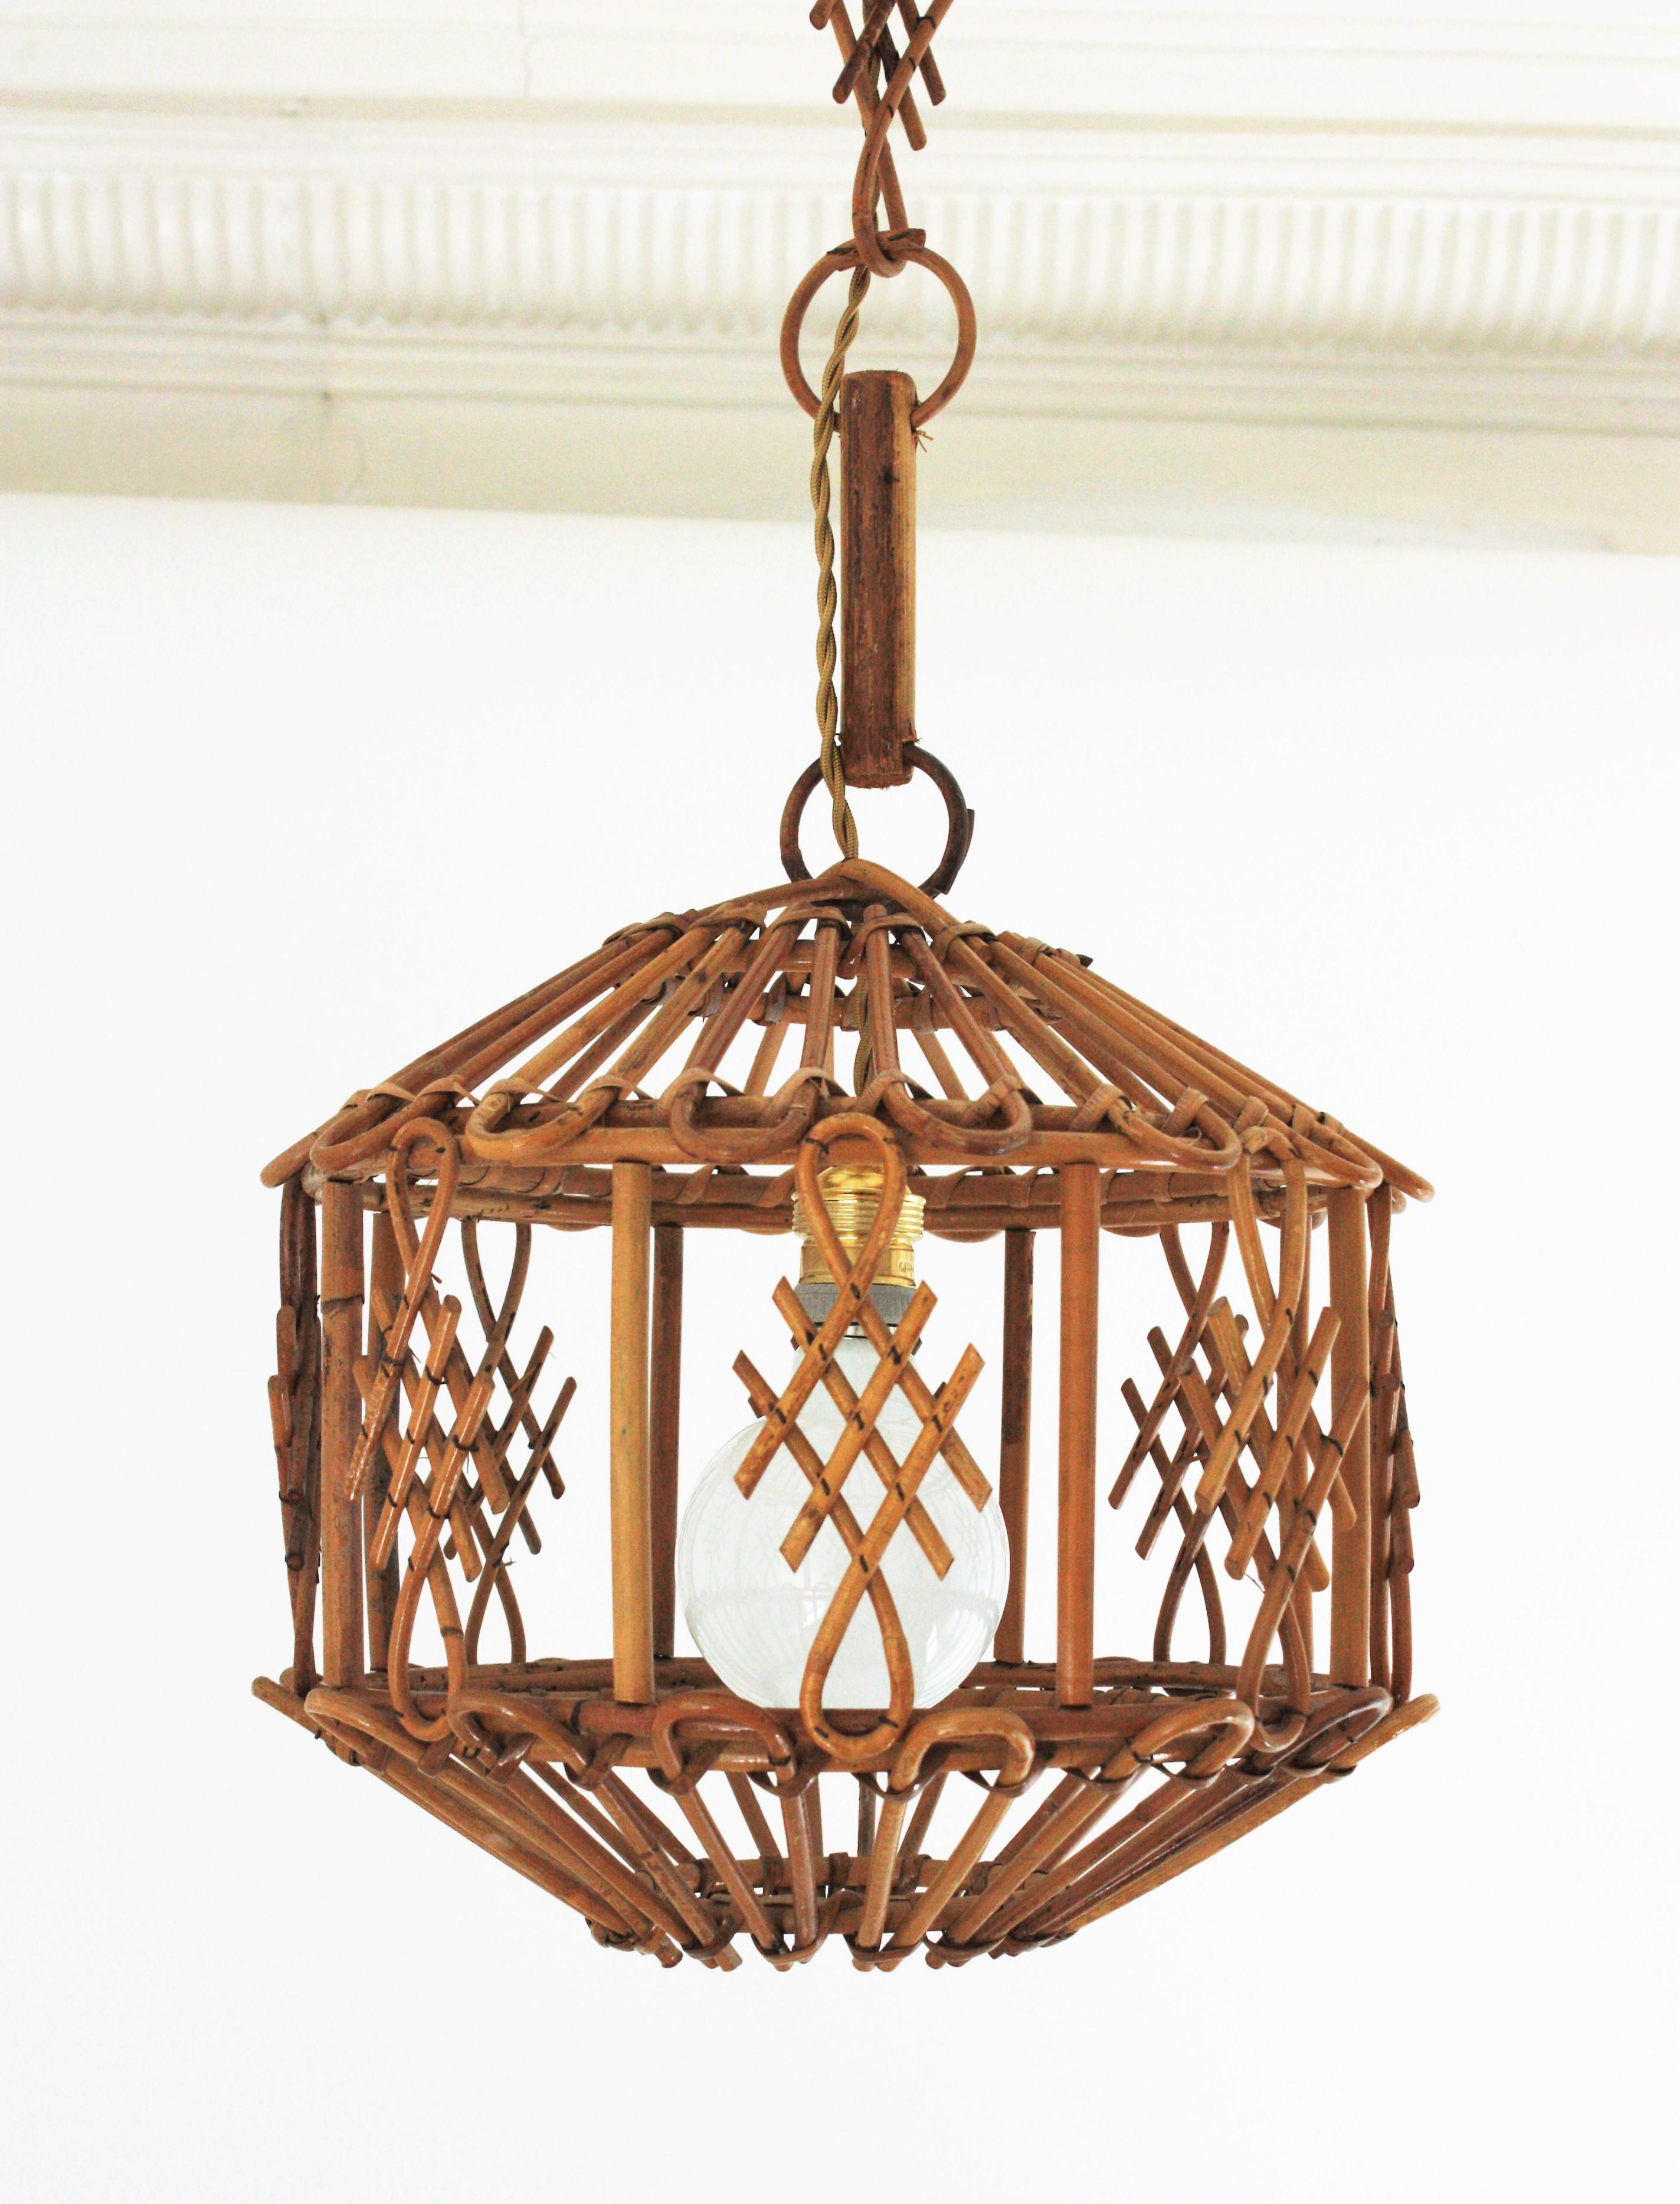 Mid-Century Modern French Modernist Rattan Pendant Lantern / Hanging Light with Chinoiserie Accents